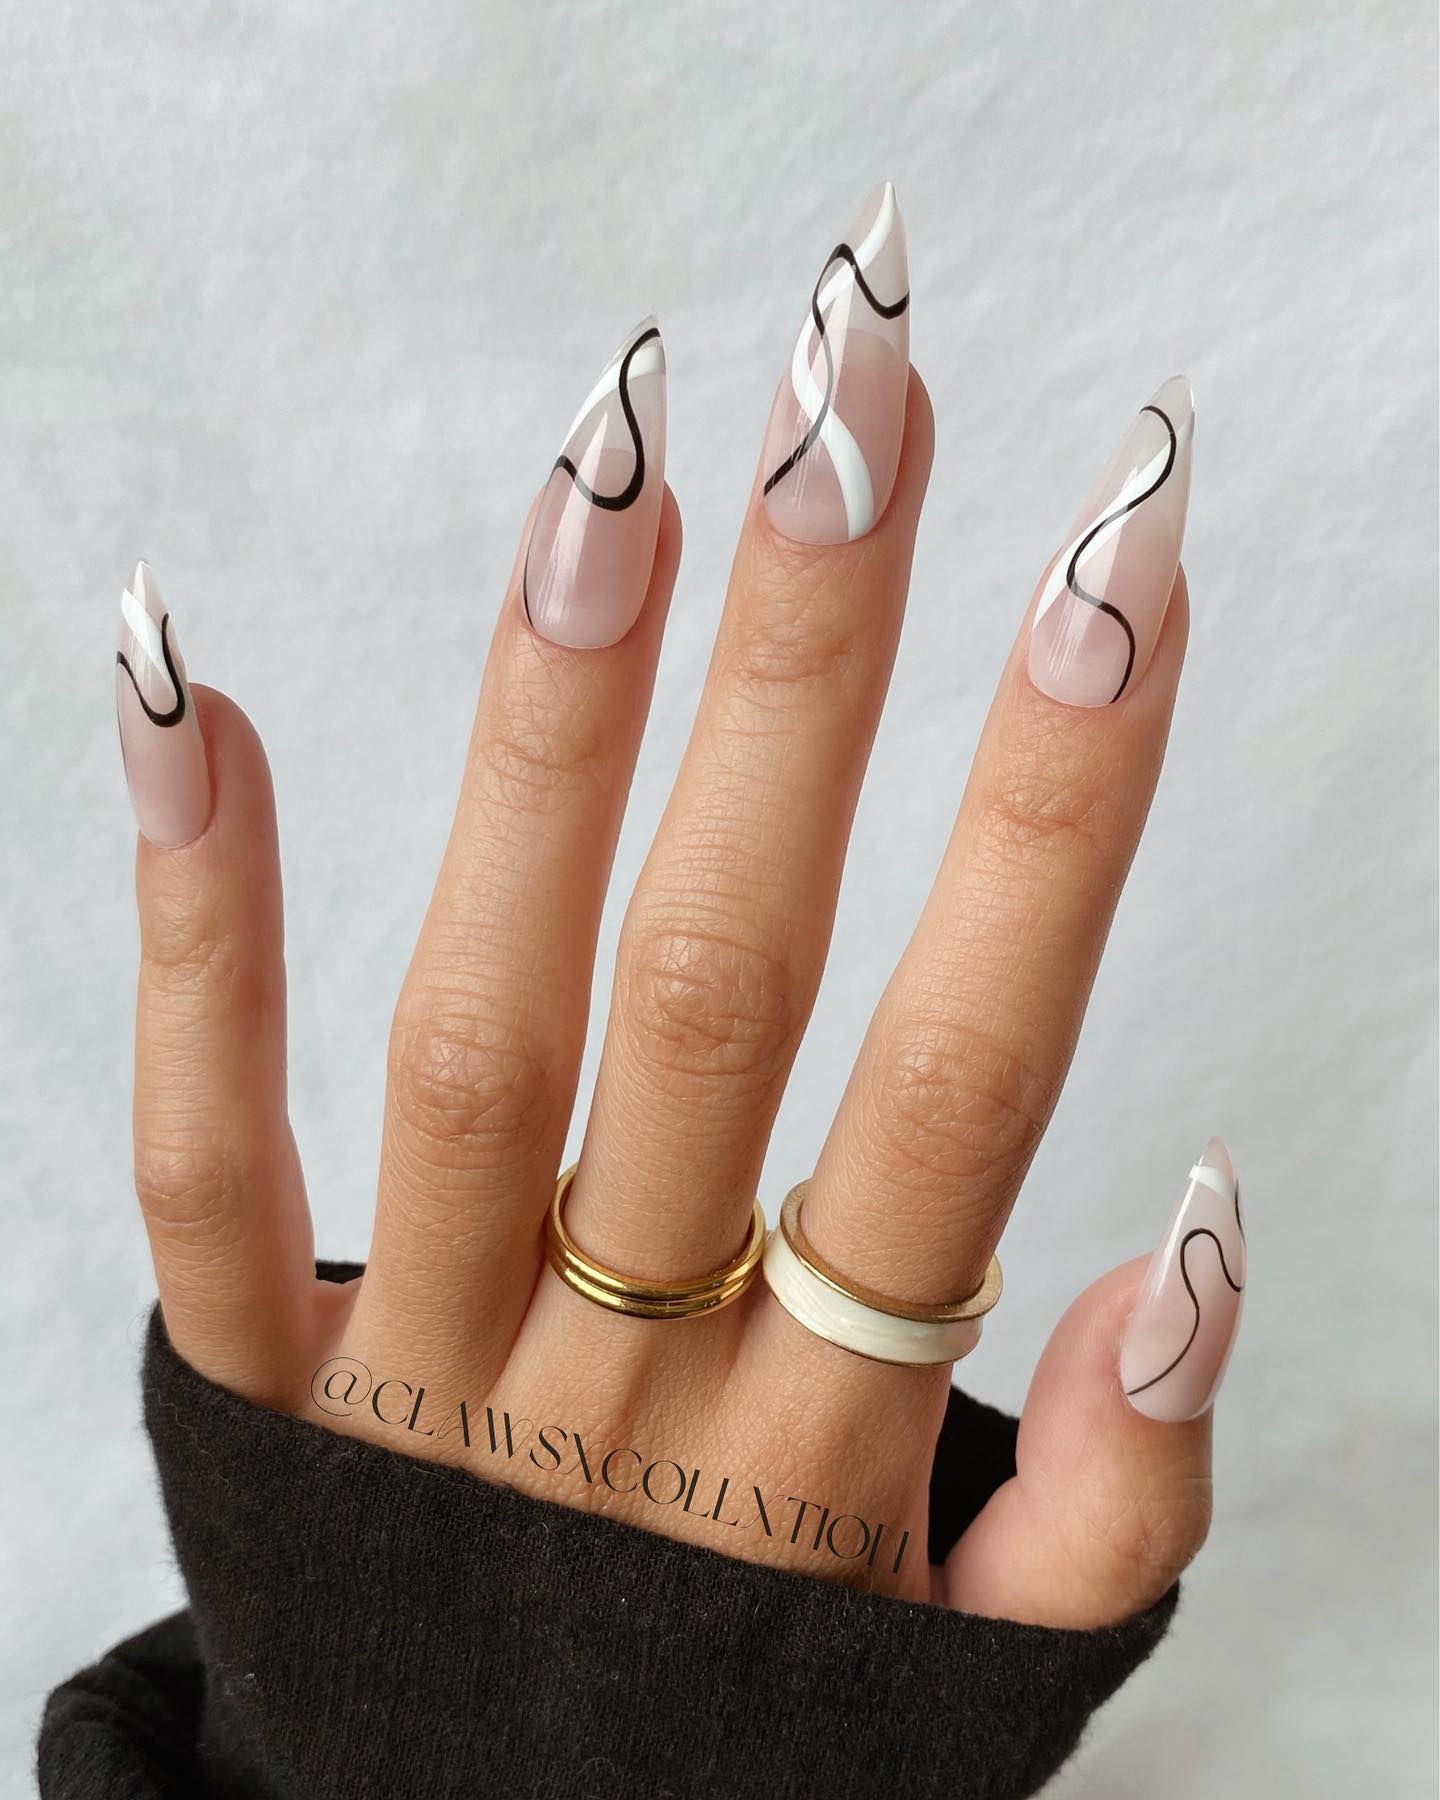 If you are a bride who wants to step outside the box on your wedding way, why don't you go for a swirl nail art? This nail art provides an abstract feel and it looks so fresh and stylish.